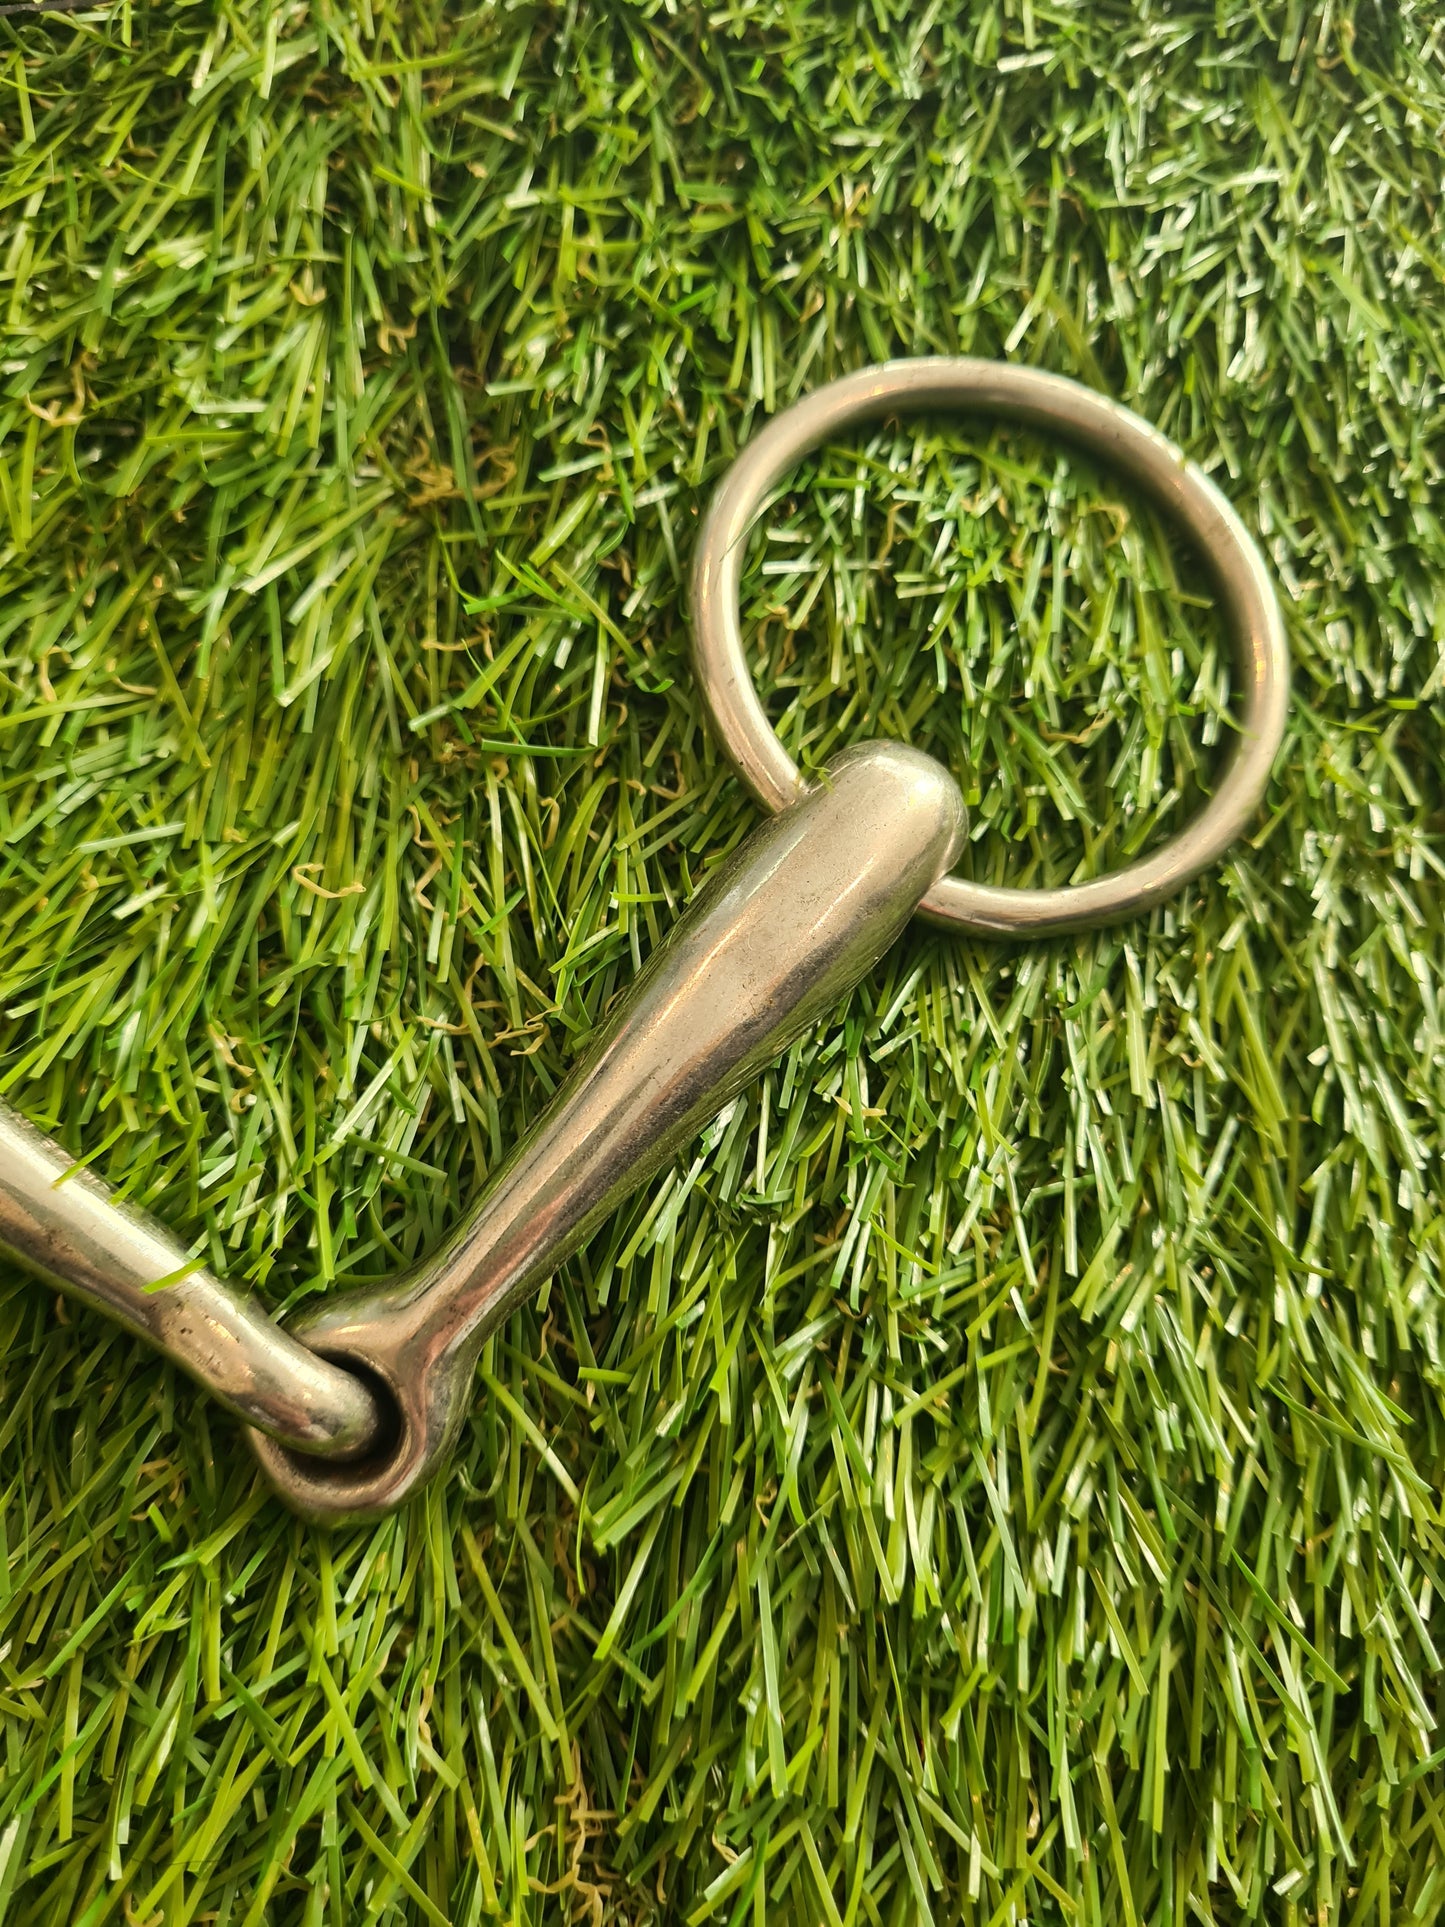 Loose Ring Snaffle 5 3/4" FREE POSTAGE🟢